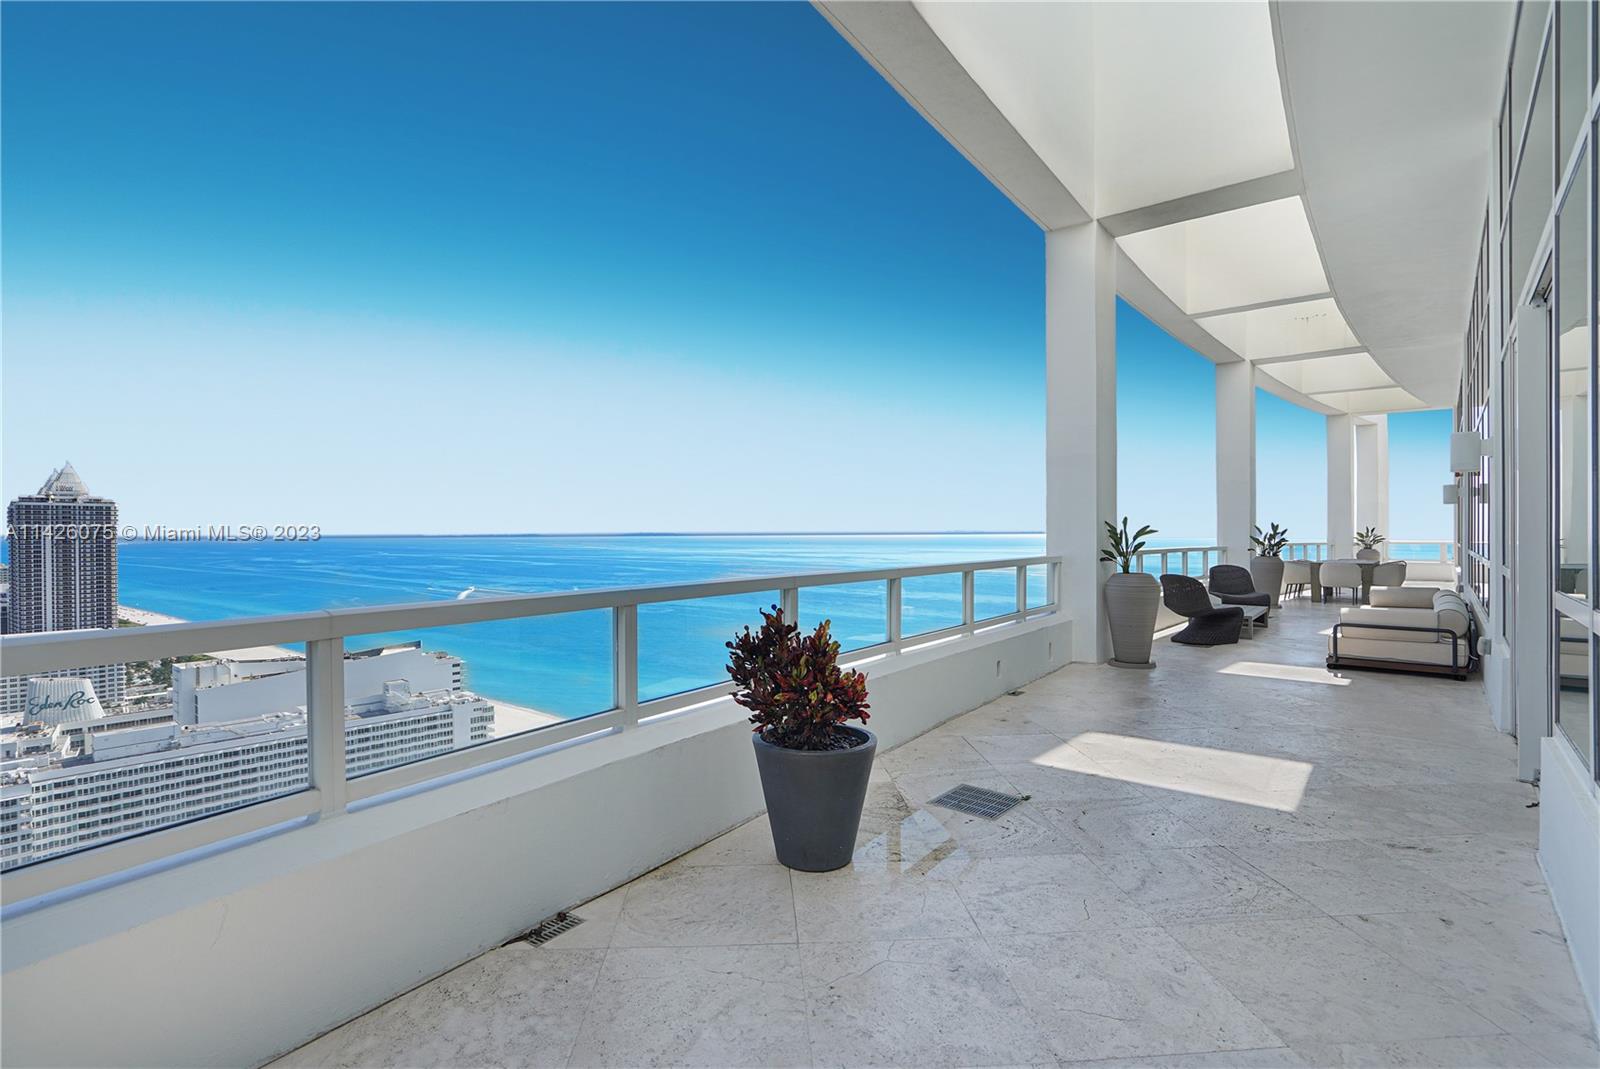 Enjoy the ultimate in resort-style living with this spectacular, turnkey, 5BD/5BA + 2 half bath penthouse encompassing the entire north side of the 37th floor at the iconic Fontainebleau II. Indulge in spectacular views of the ocean, bay & Miami skyline from the huge 3300 SF terrace with private pool & shower. The great room boasts volume ceilings & soaring windows, inviting natural light and beauty indoors. Keep your yacht at the Marina across the street on the Intracoastal. The Fontainebleau Resort offers amenities on 22 oceanfront acres including award-winning restaurants, LIV night club, Lapis spa & fitness center. Enroll in the hotel rental program and receive income while not using. The maintenance fee includes all utilities, valet and free breakfast in the owner’s lounge.